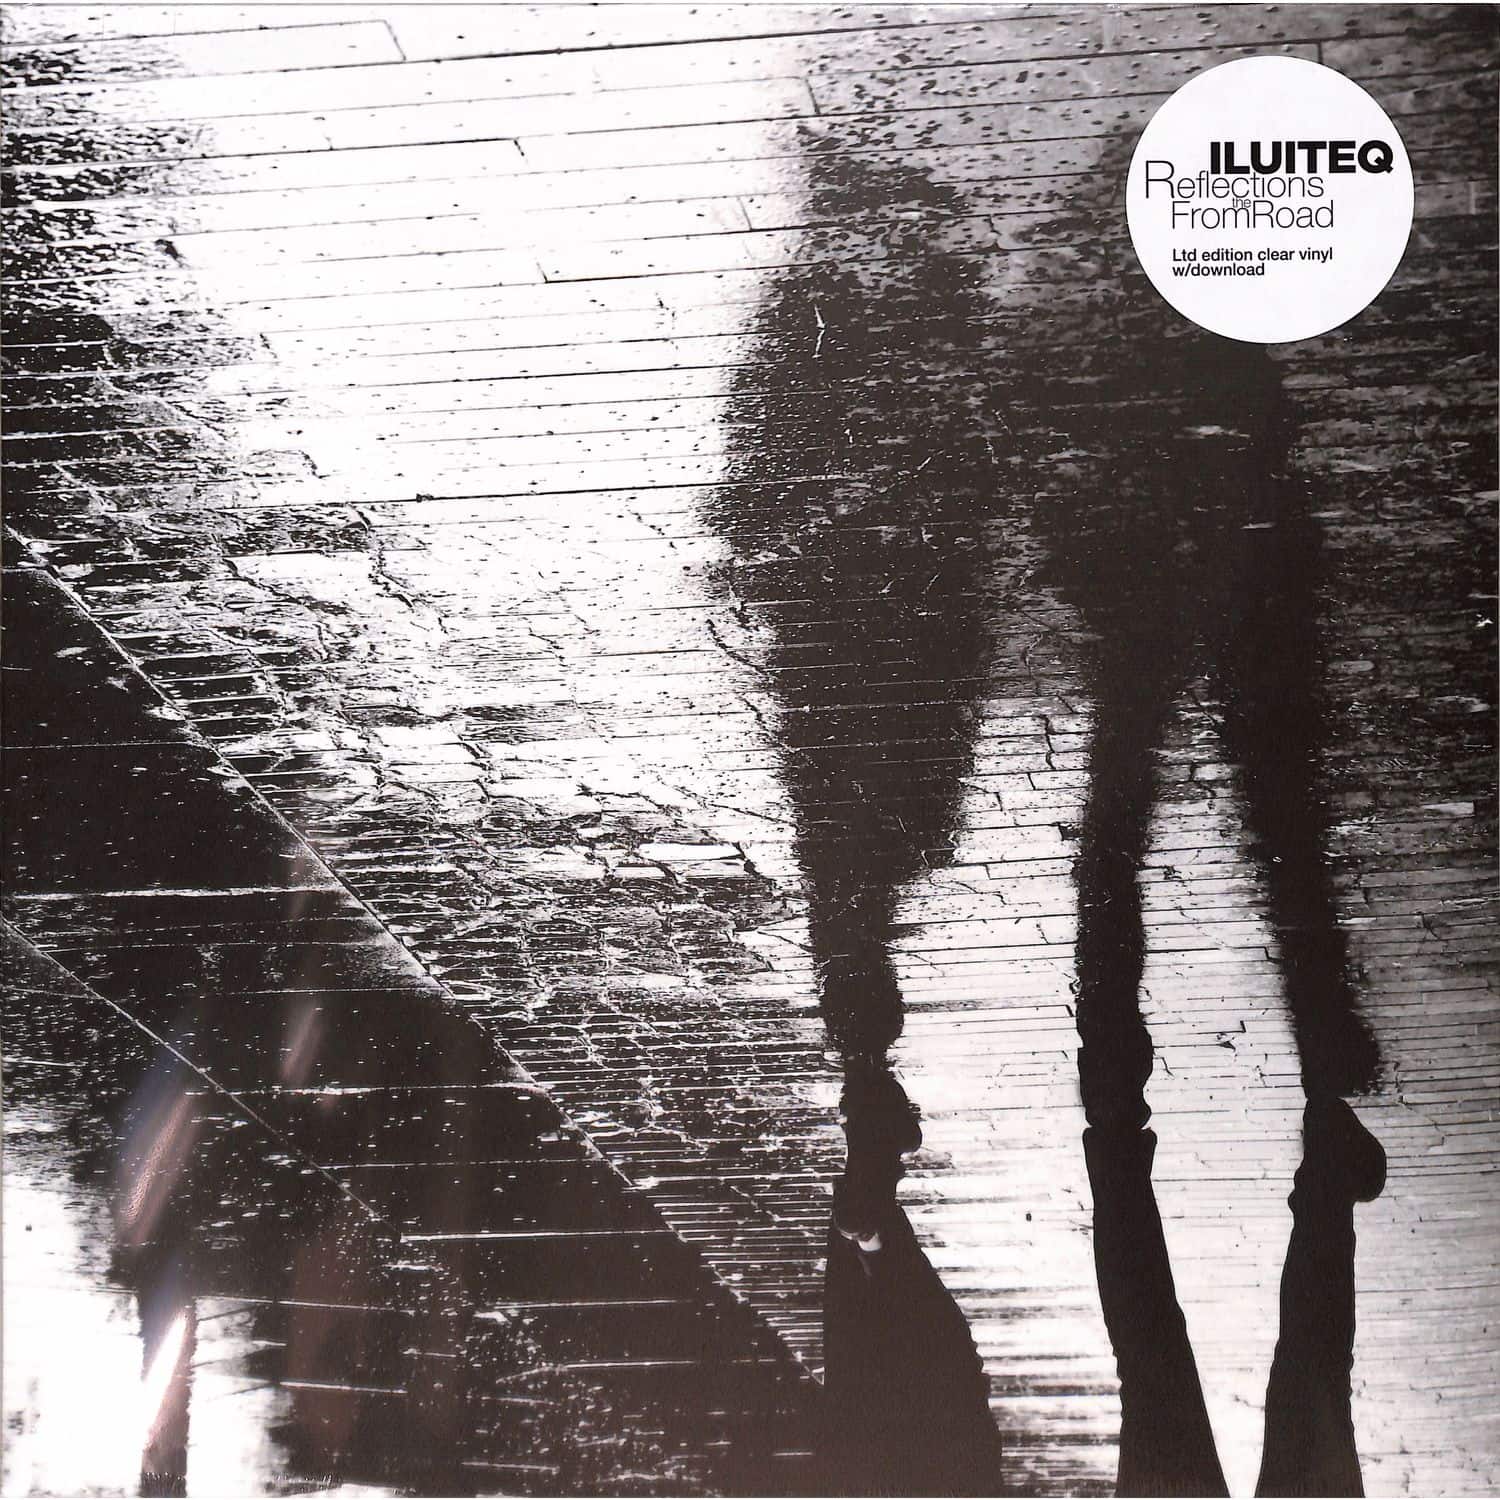 Iluiteq - REFLECTIONS FROM THE ROAD 